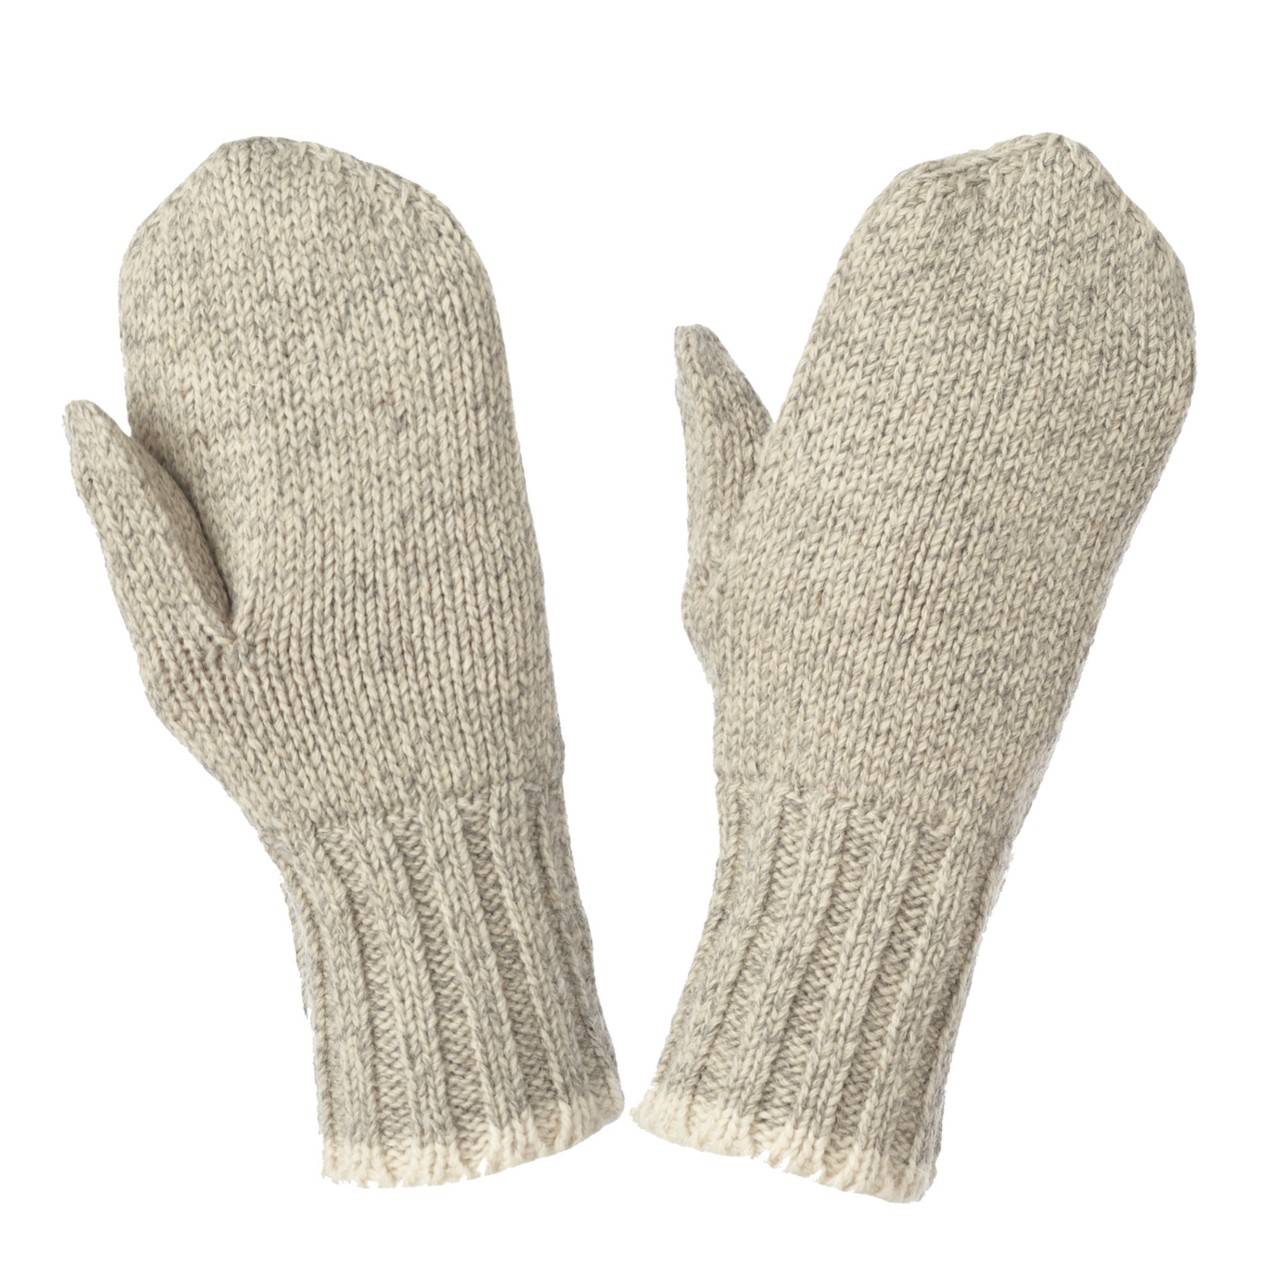 Image of mittens links to all mittens catalog.